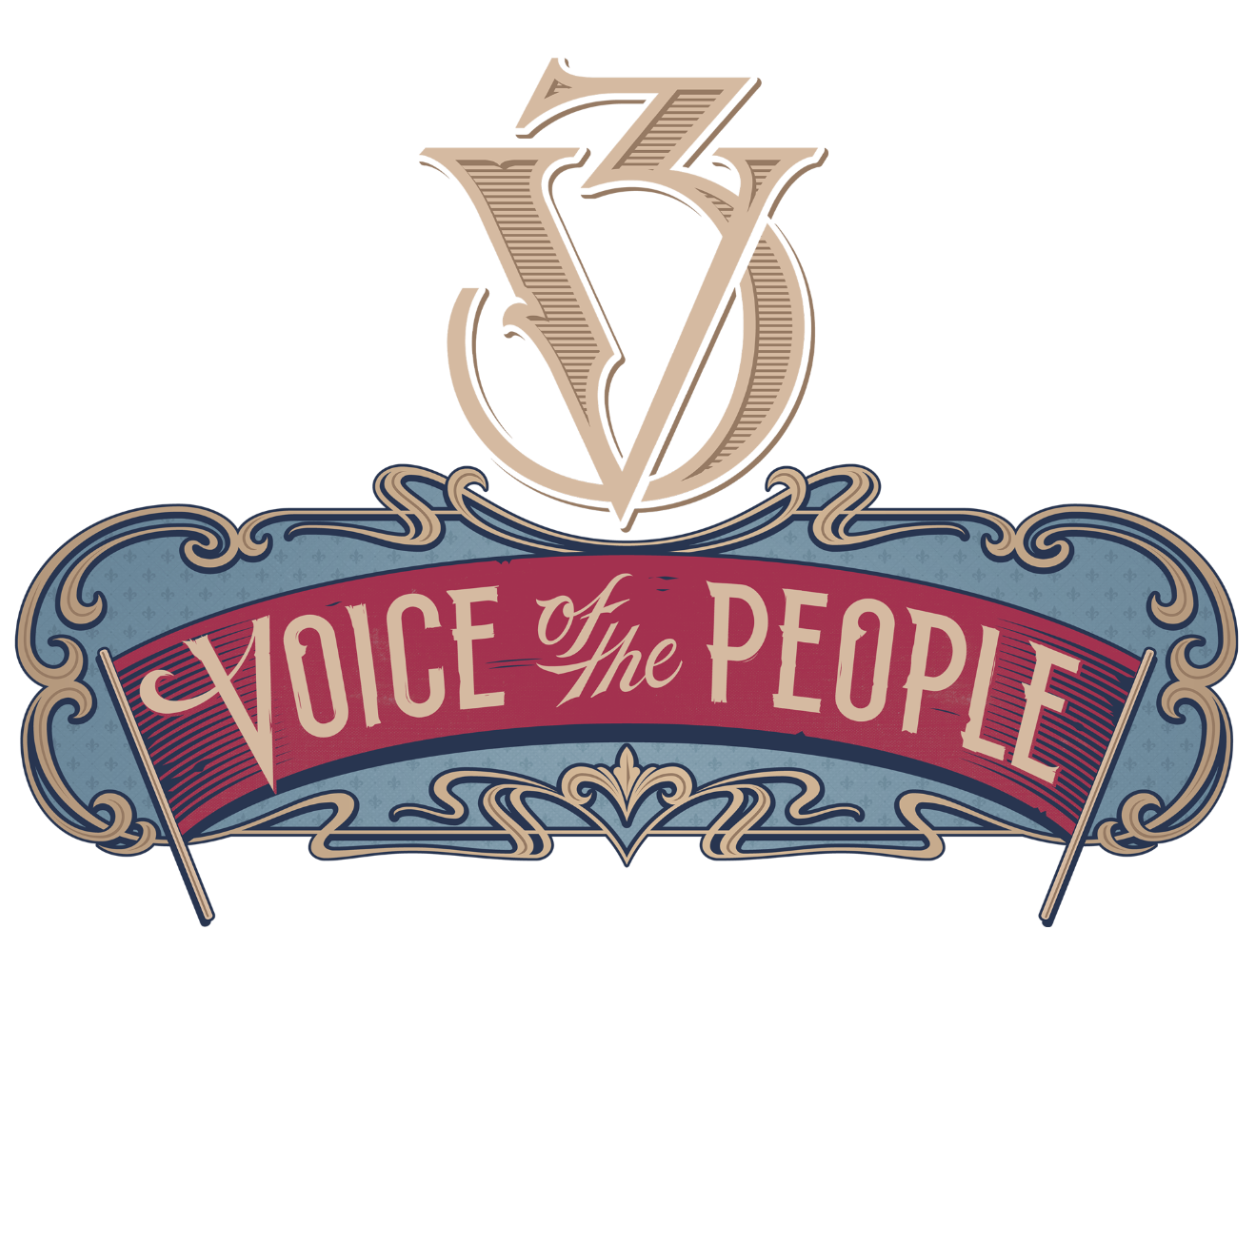 Victoria 3 - Voice Of The People